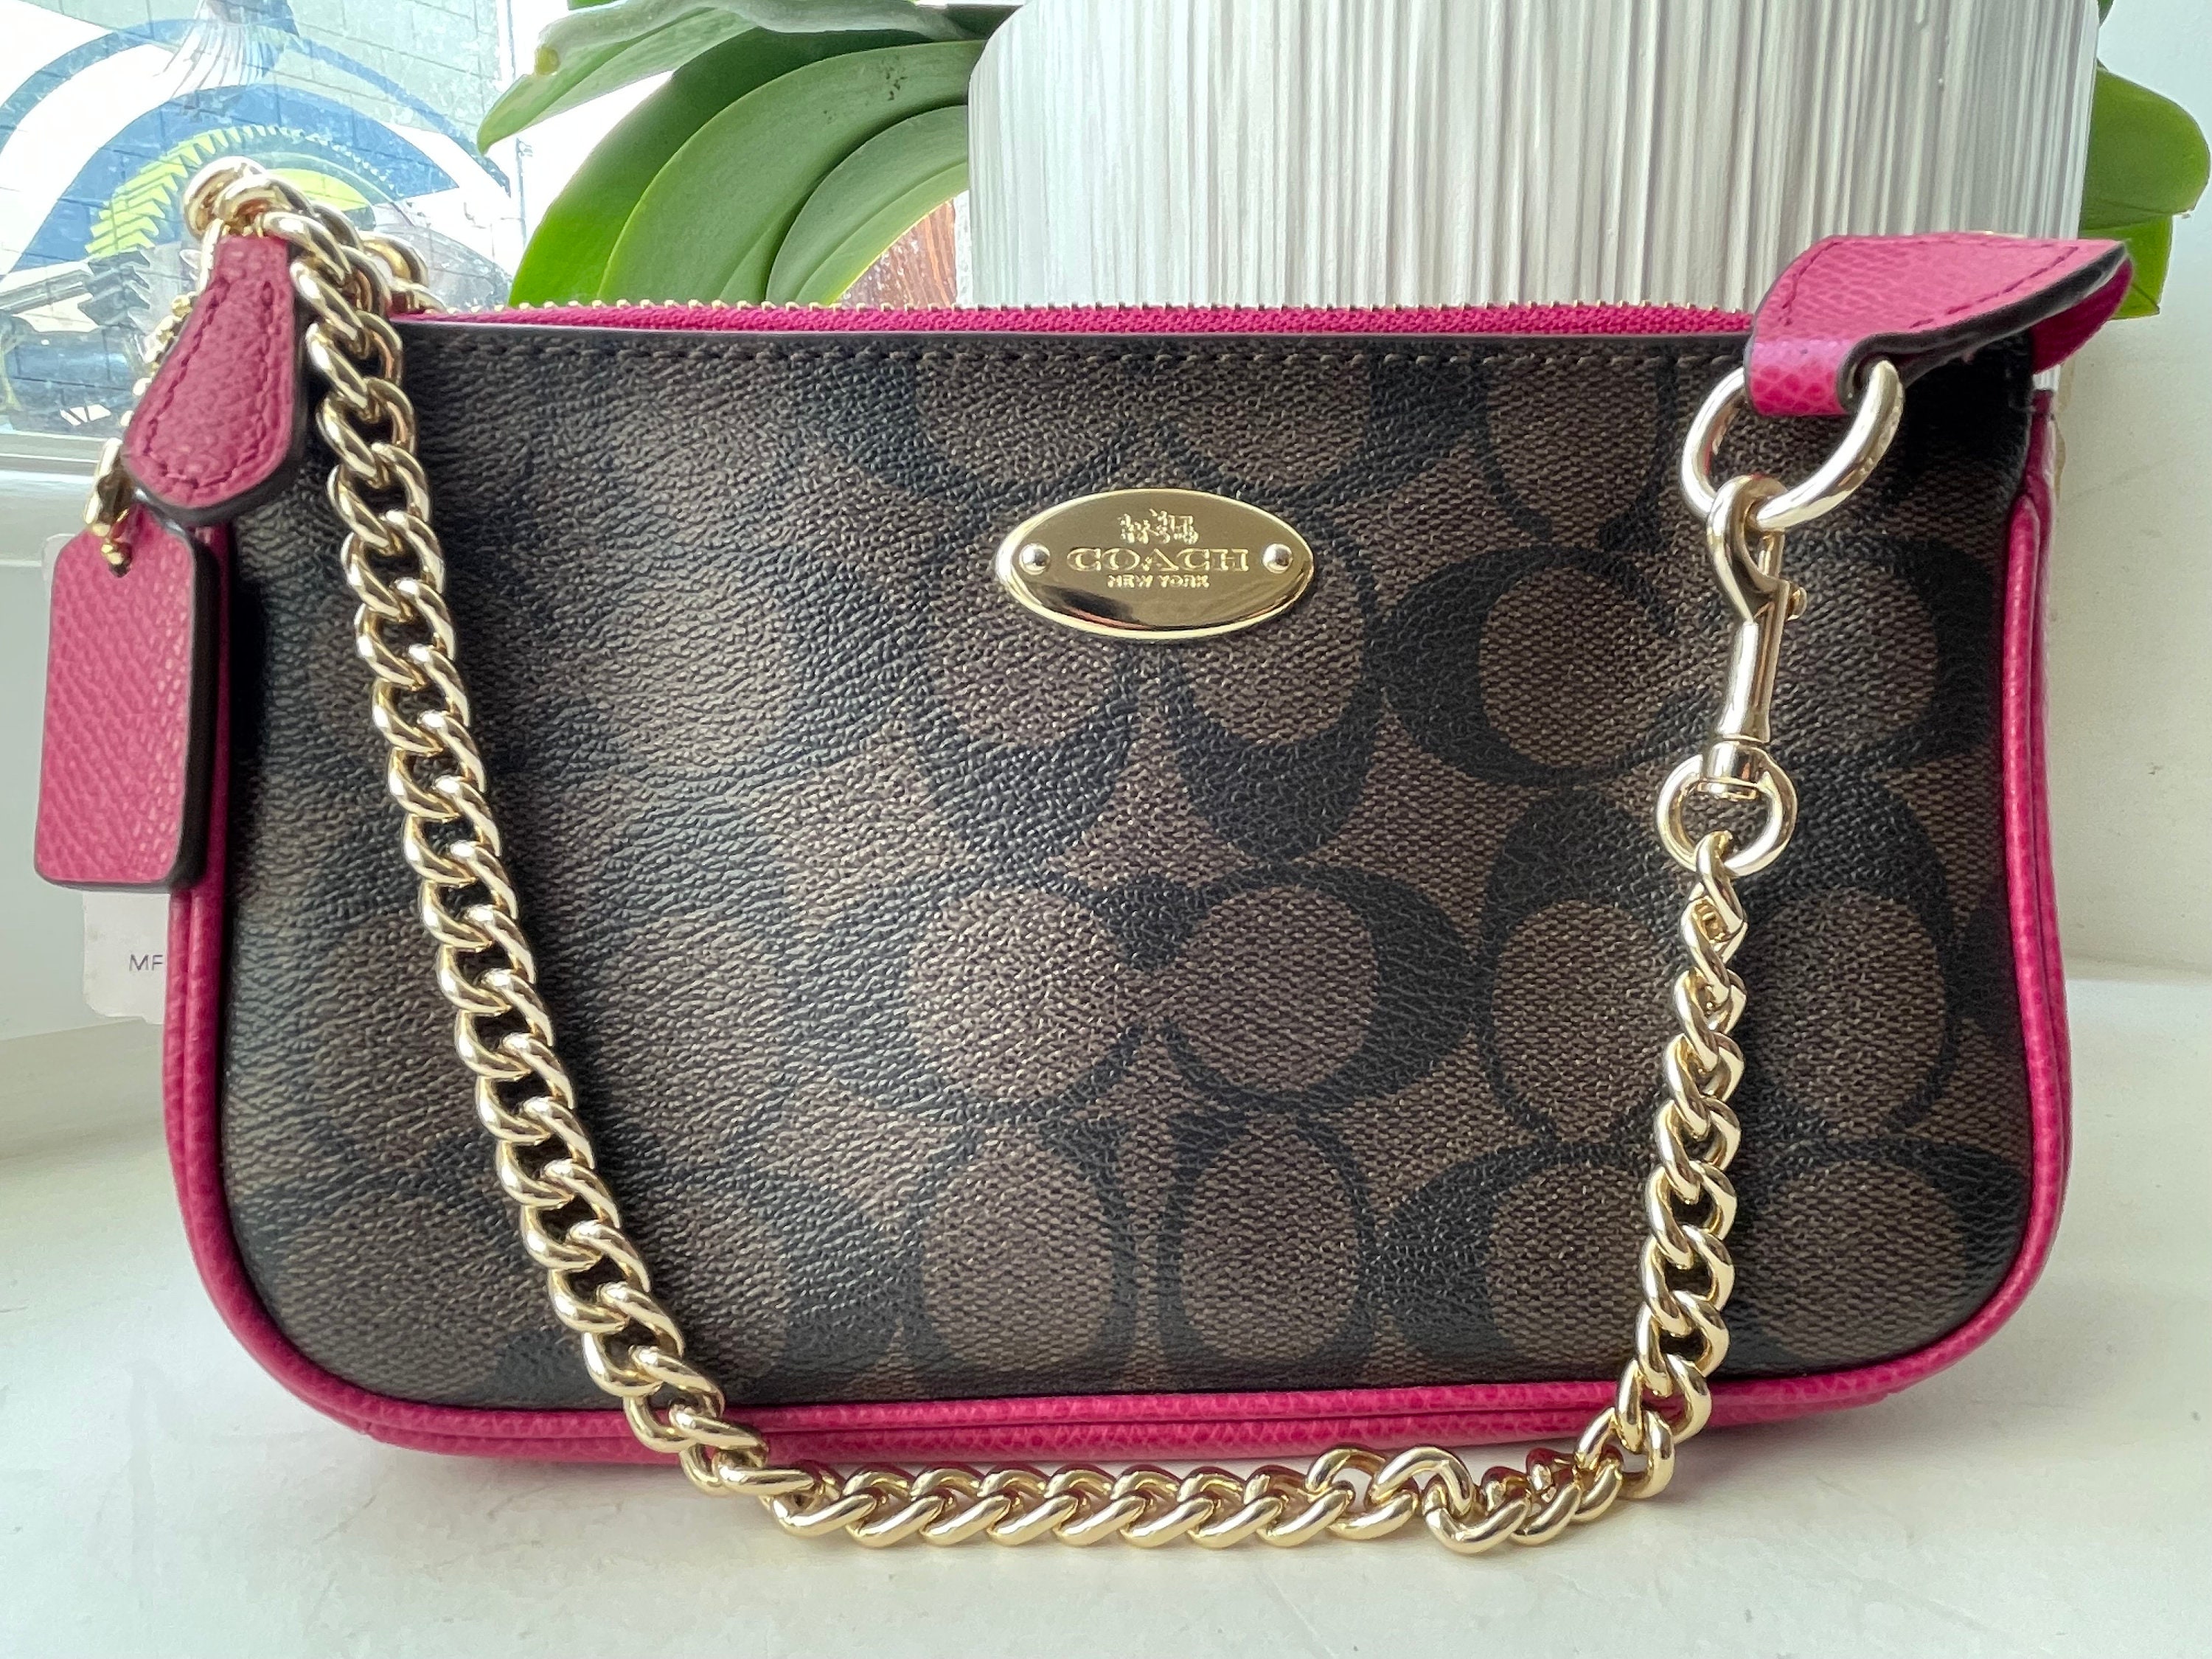 Sell Used Designer Handbags - Instant Quotes | Trade Now